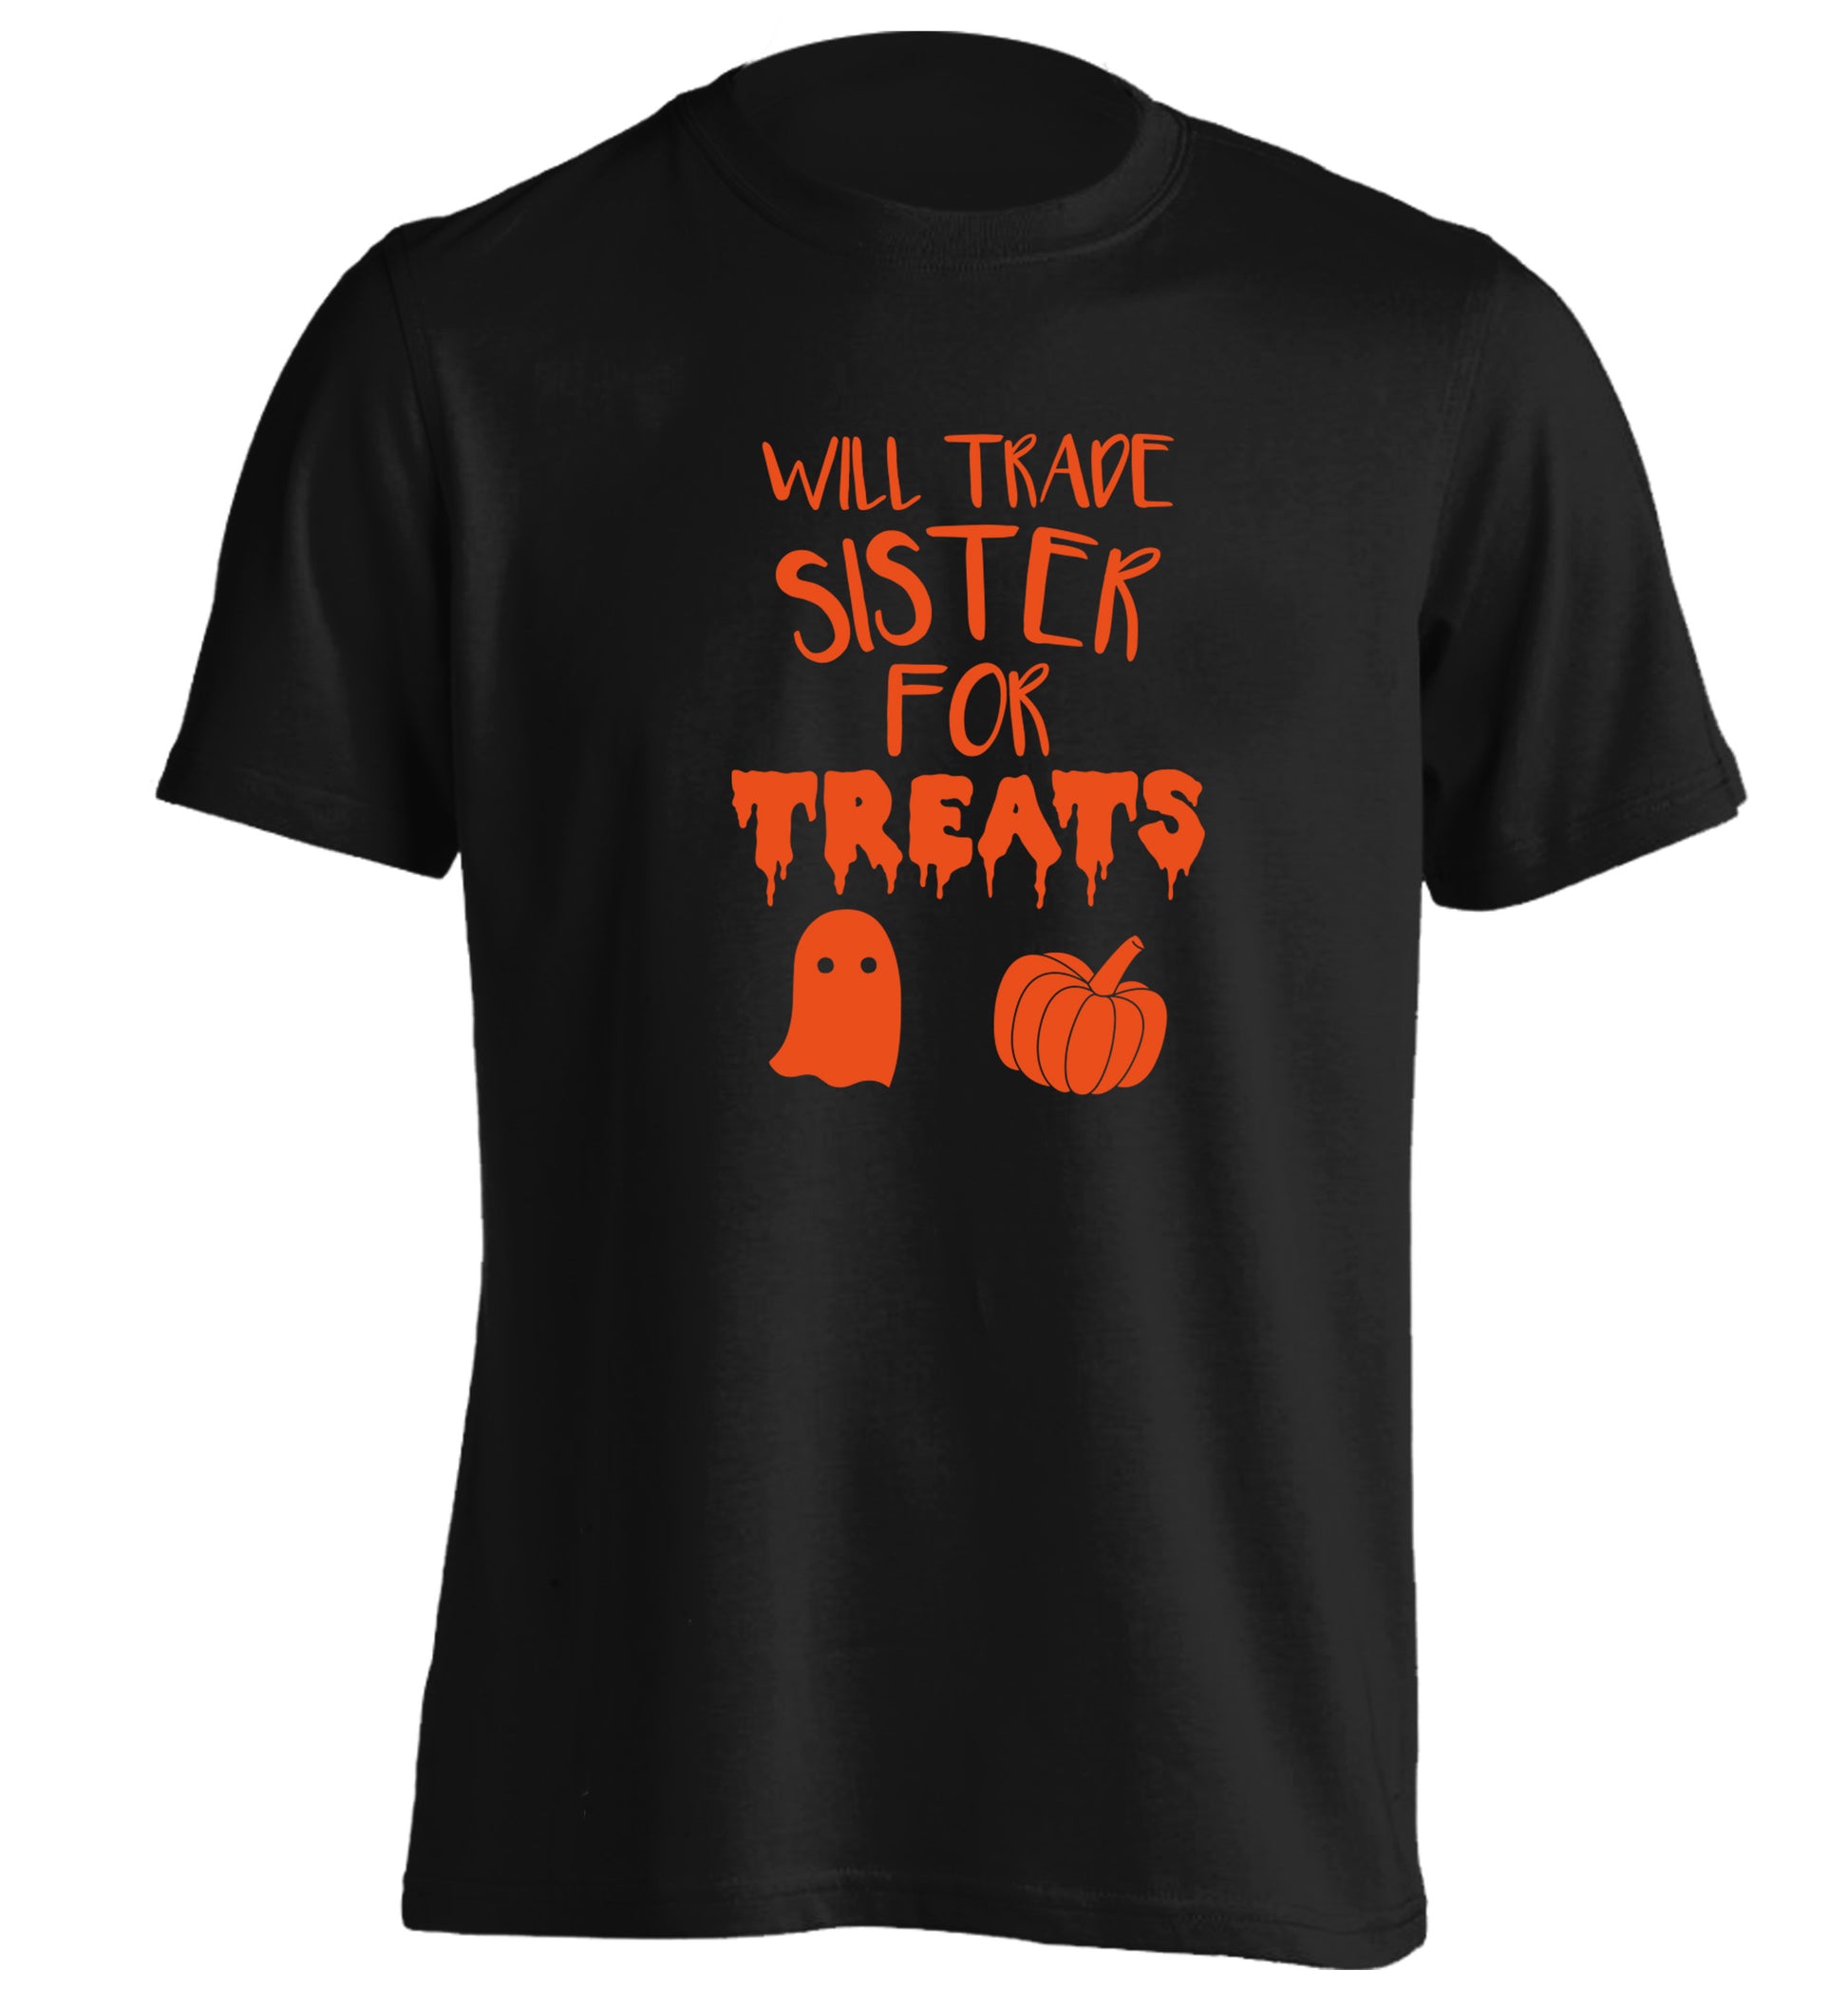 Will trade sister for treats adults unisex black Tshirt 2XL